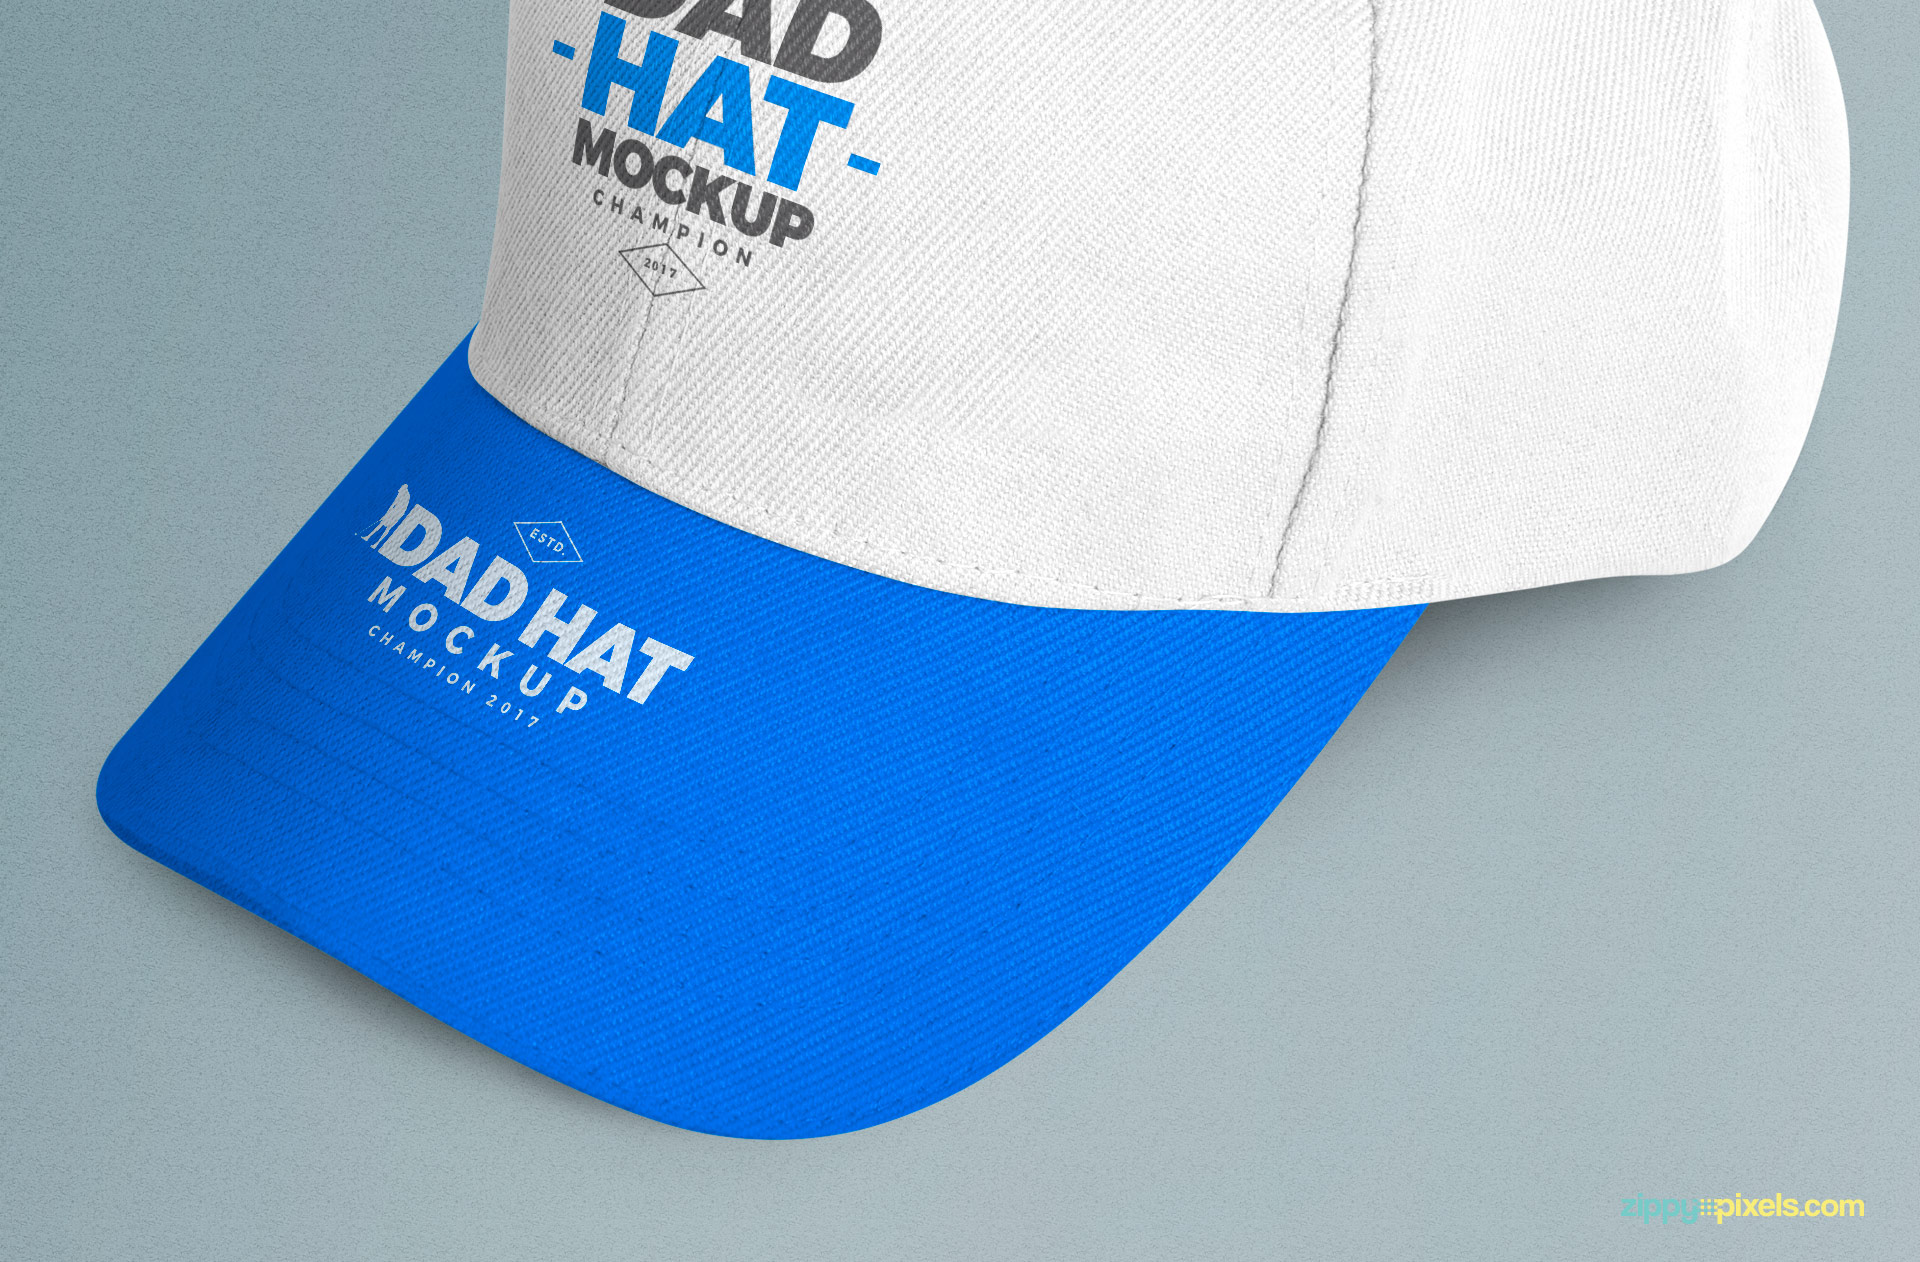 change front panel and brim designs along with background color of this free dad hat mockup psd